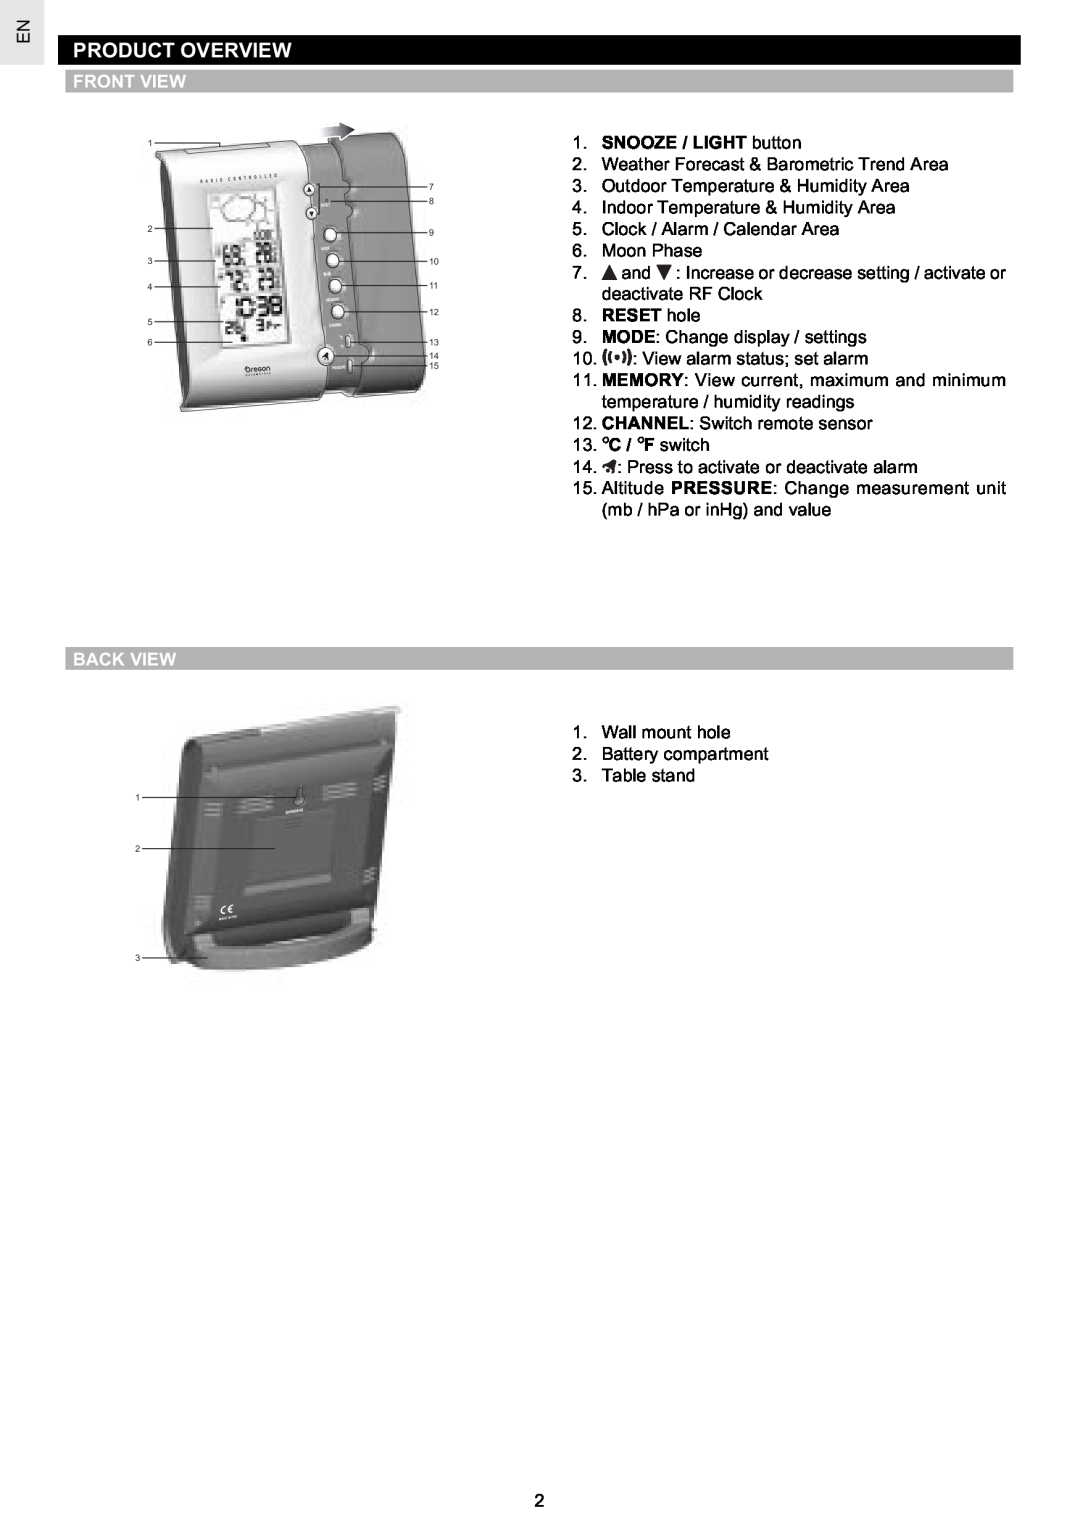 Oregon Scientific BAR629HGU Product Overview, Front View, SNOOZE / LIGHT button, RESET hole, 13. C / F switch, Back View 